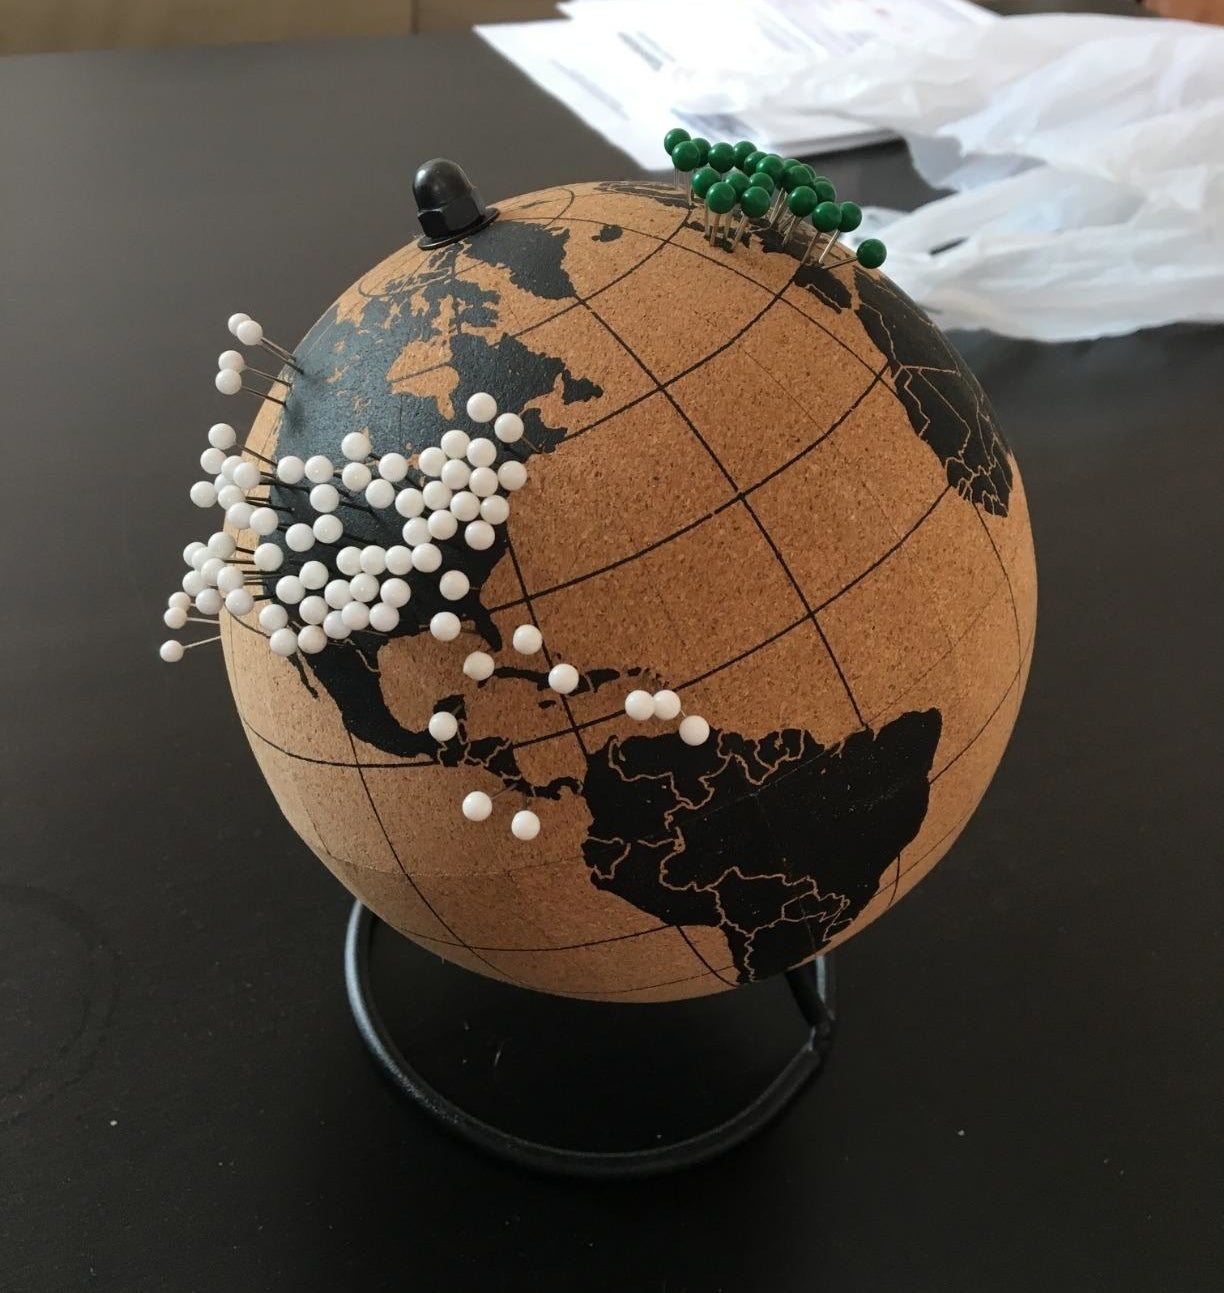 Reviewer photo of the cork globe with pins it in